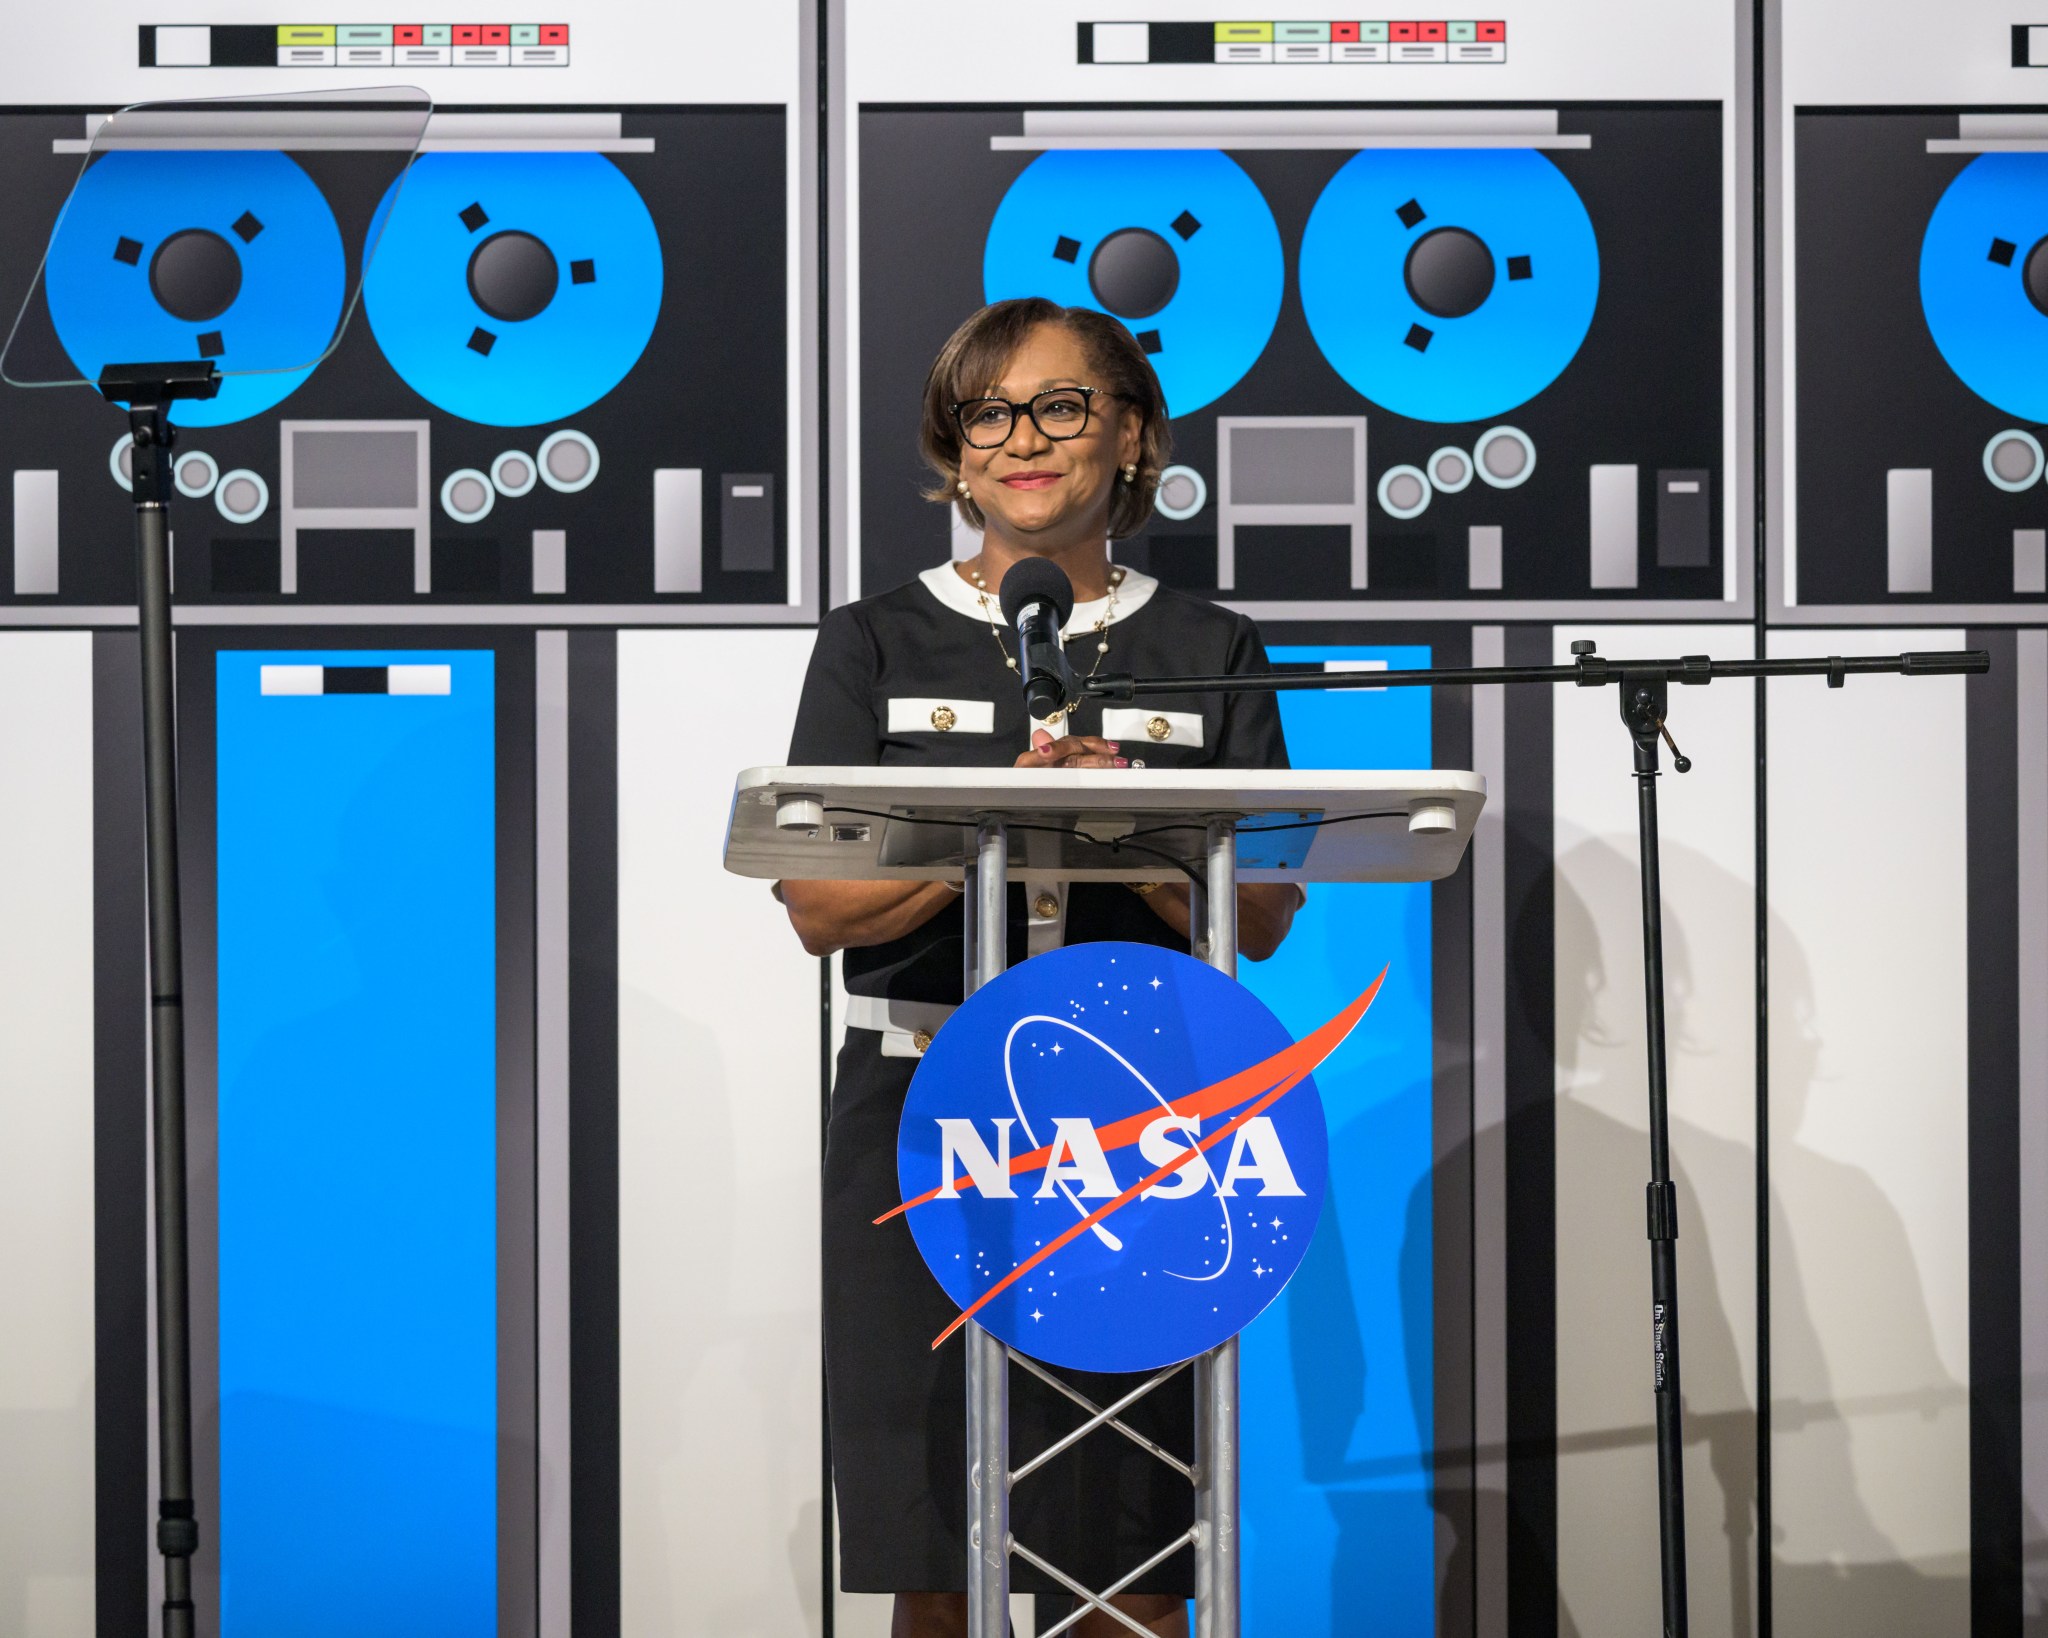 A woman stands at a podium with the NASA logo, delivering a speech. She is dressed in a black and white outfit and wearing glasses. Behind her is a backdrop featuring large images of tape reels and computer equipment. Two microphones and a teleprompter are set up on either side of the podium.